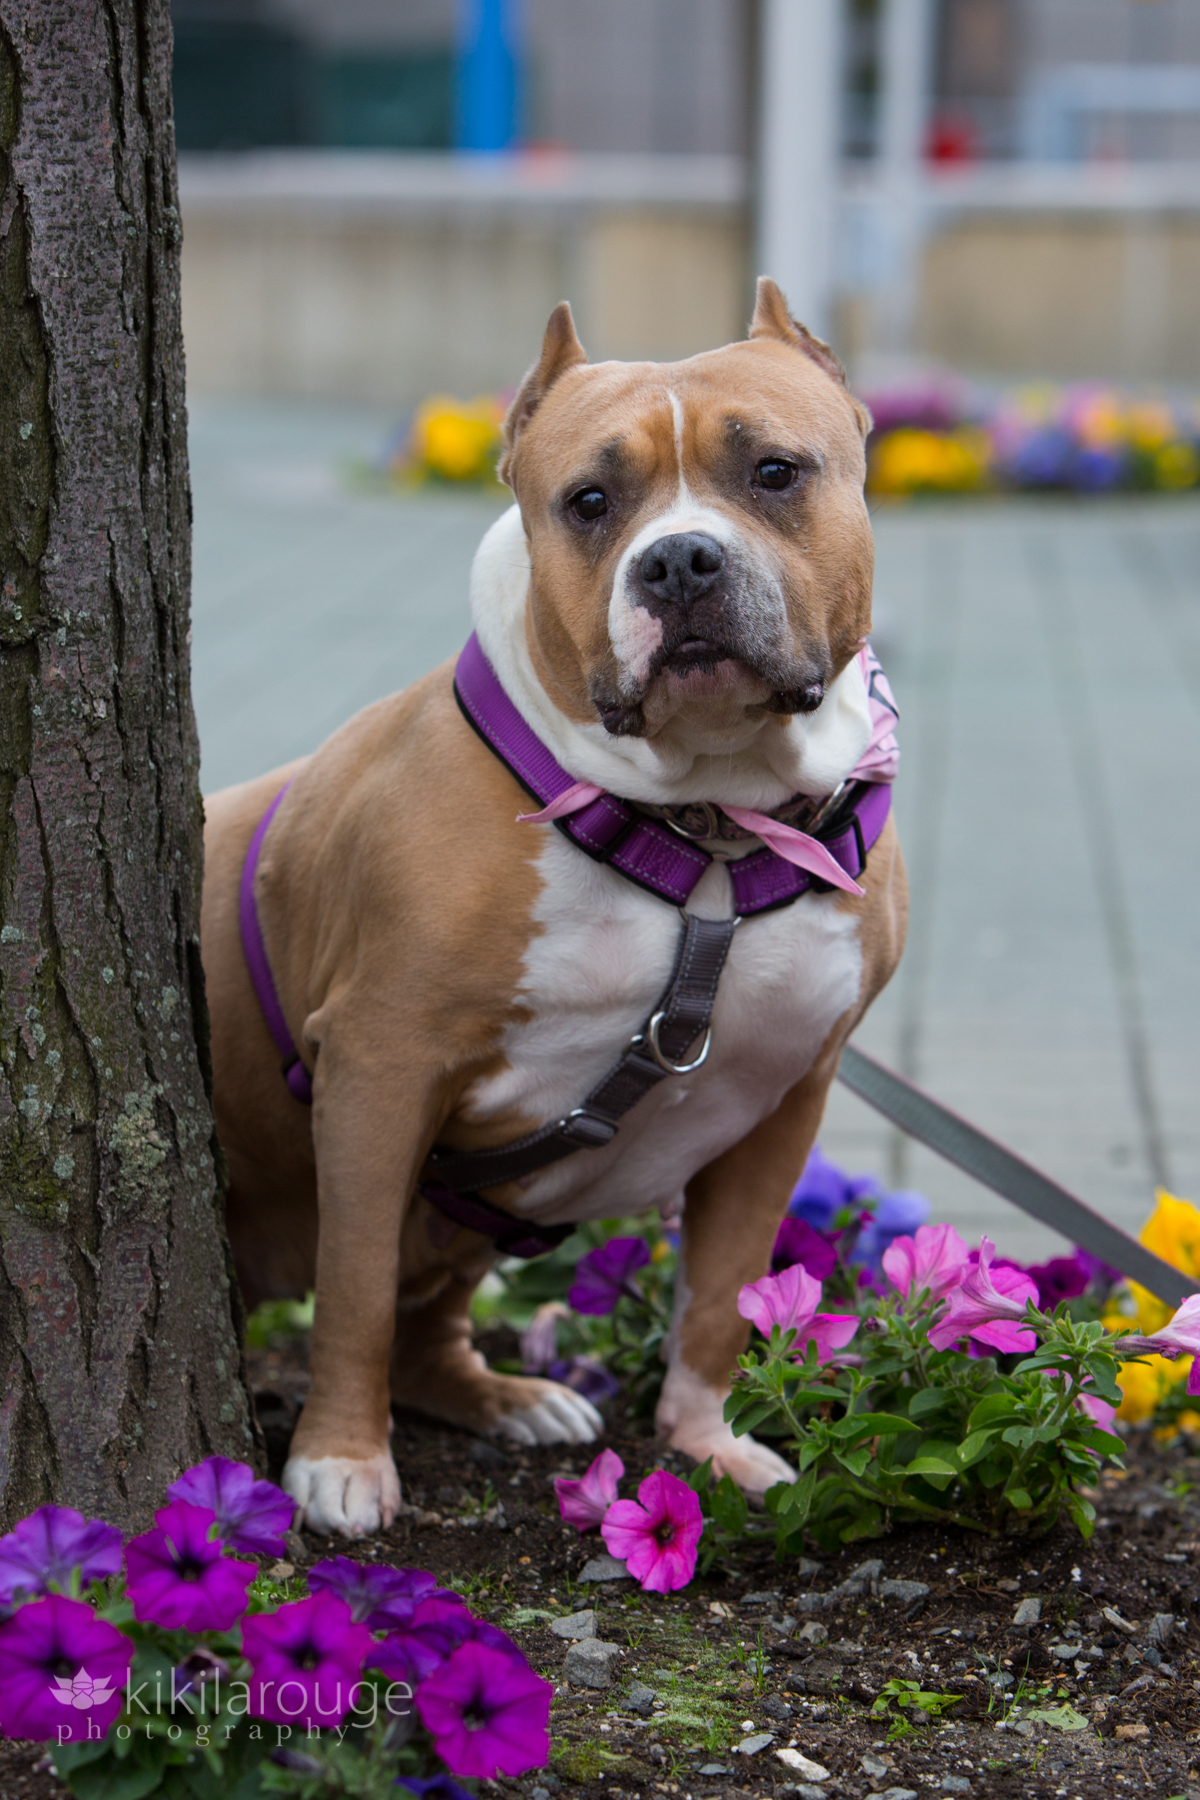 Tan and white pit type dog with purple harness and pink bandana